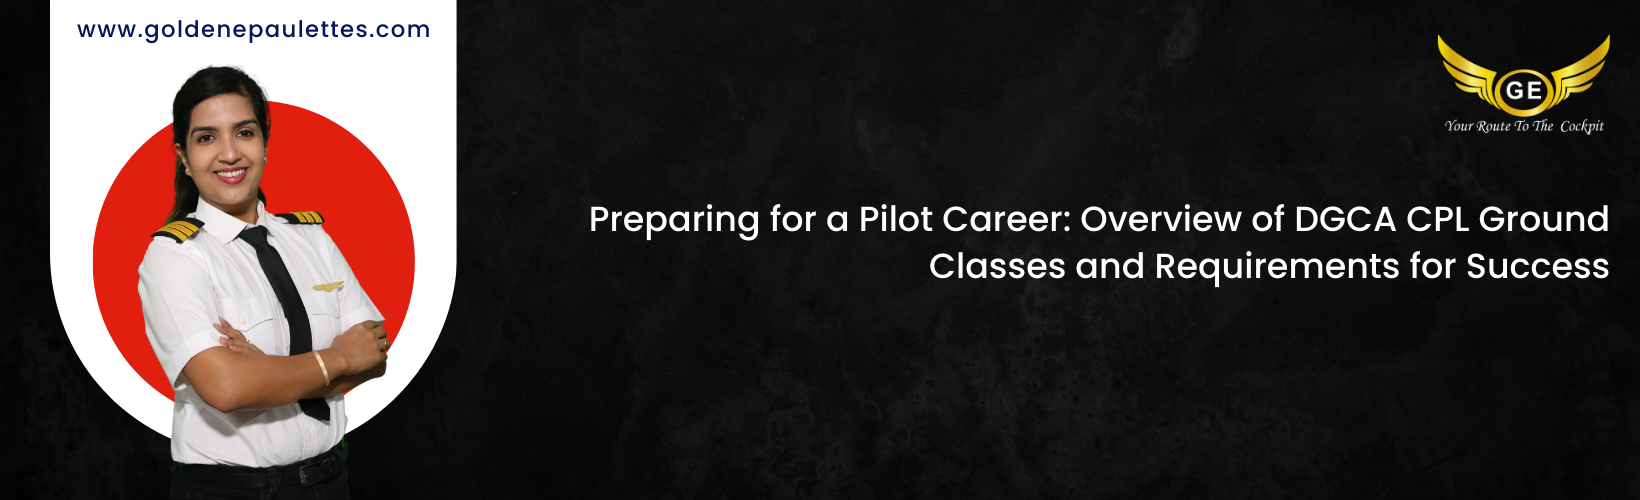 Understanding the Requirements for the DGCA CPL Ground Classes